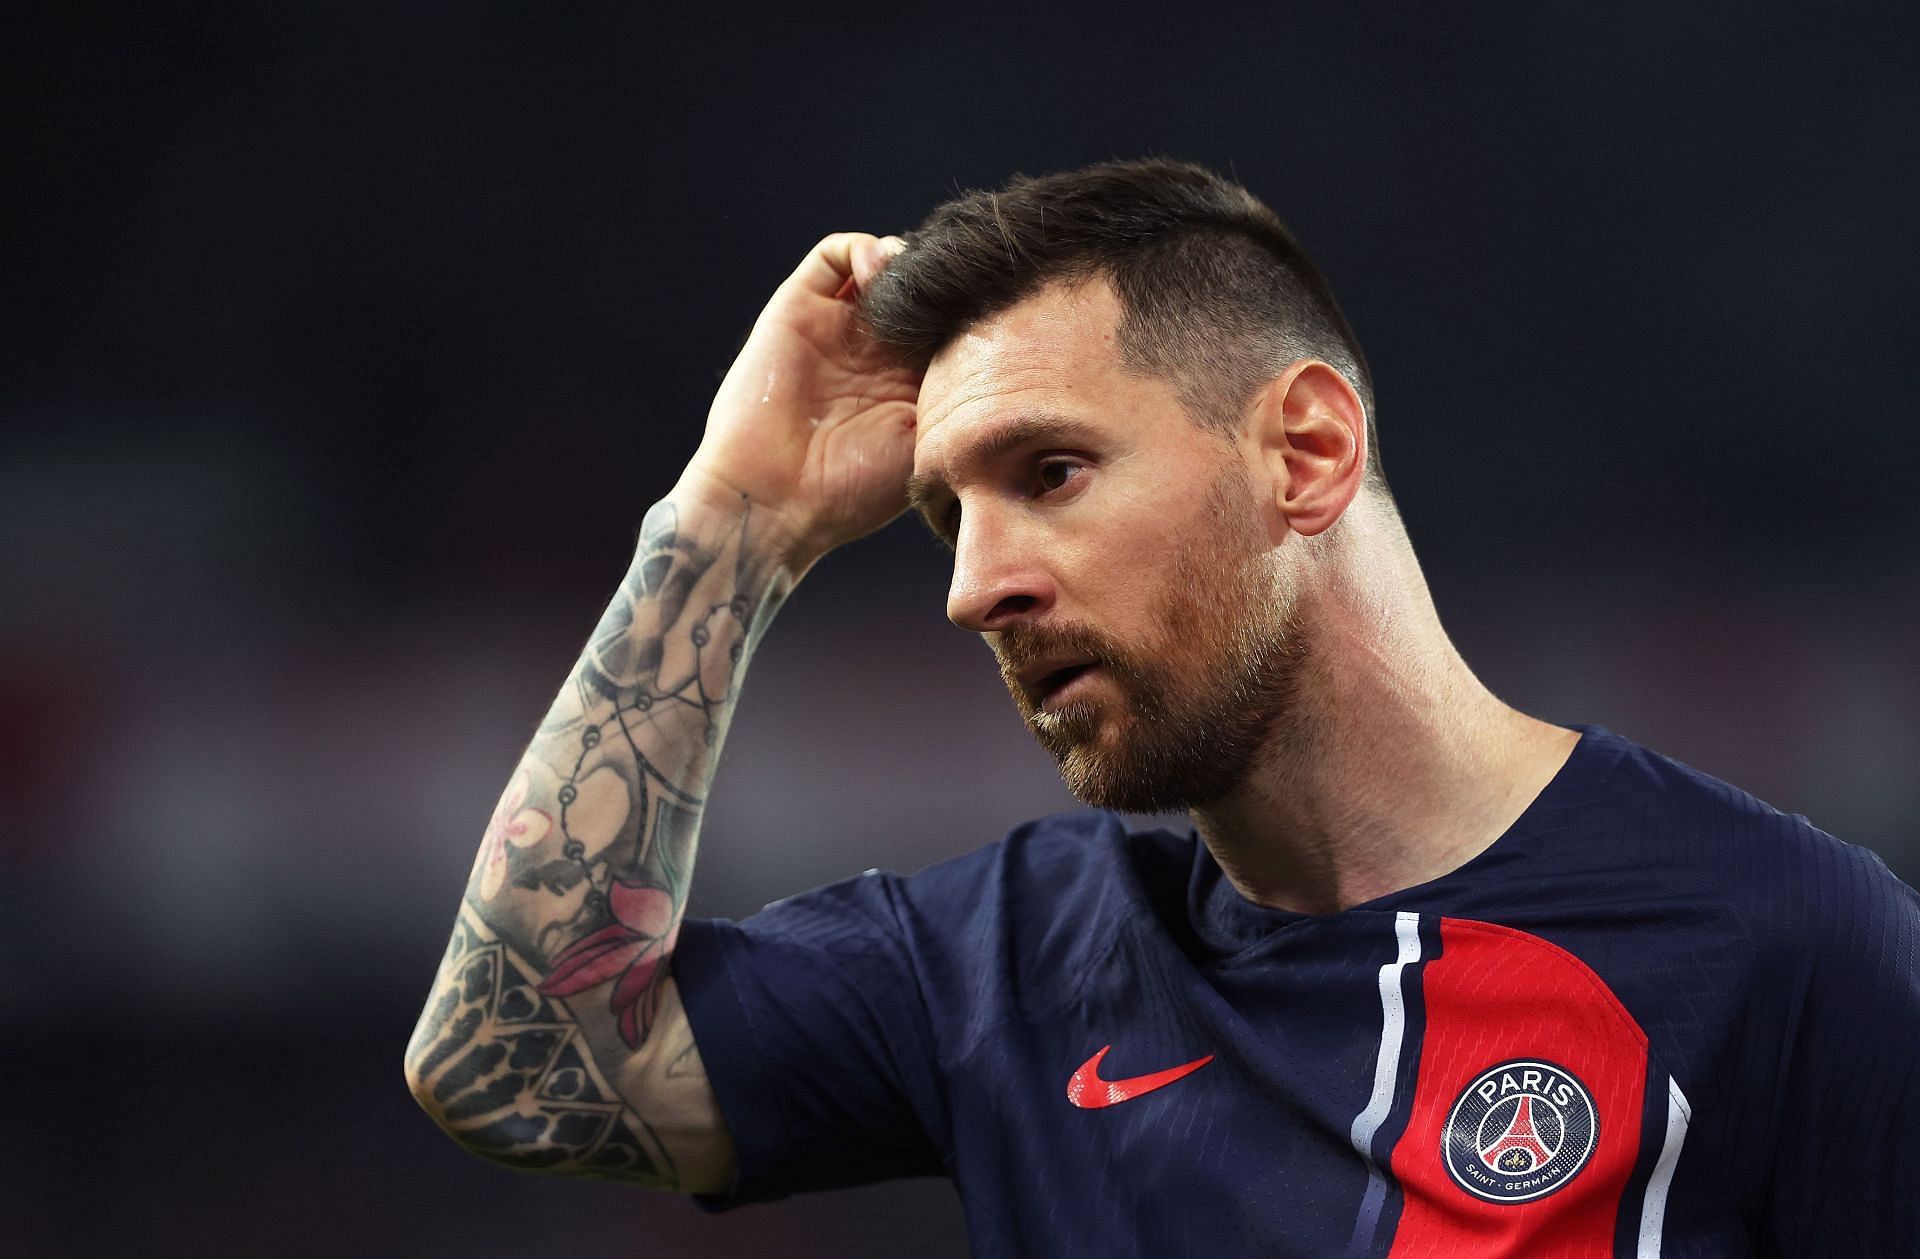 Messi and a large section of PSG fans never saw eye to eye.